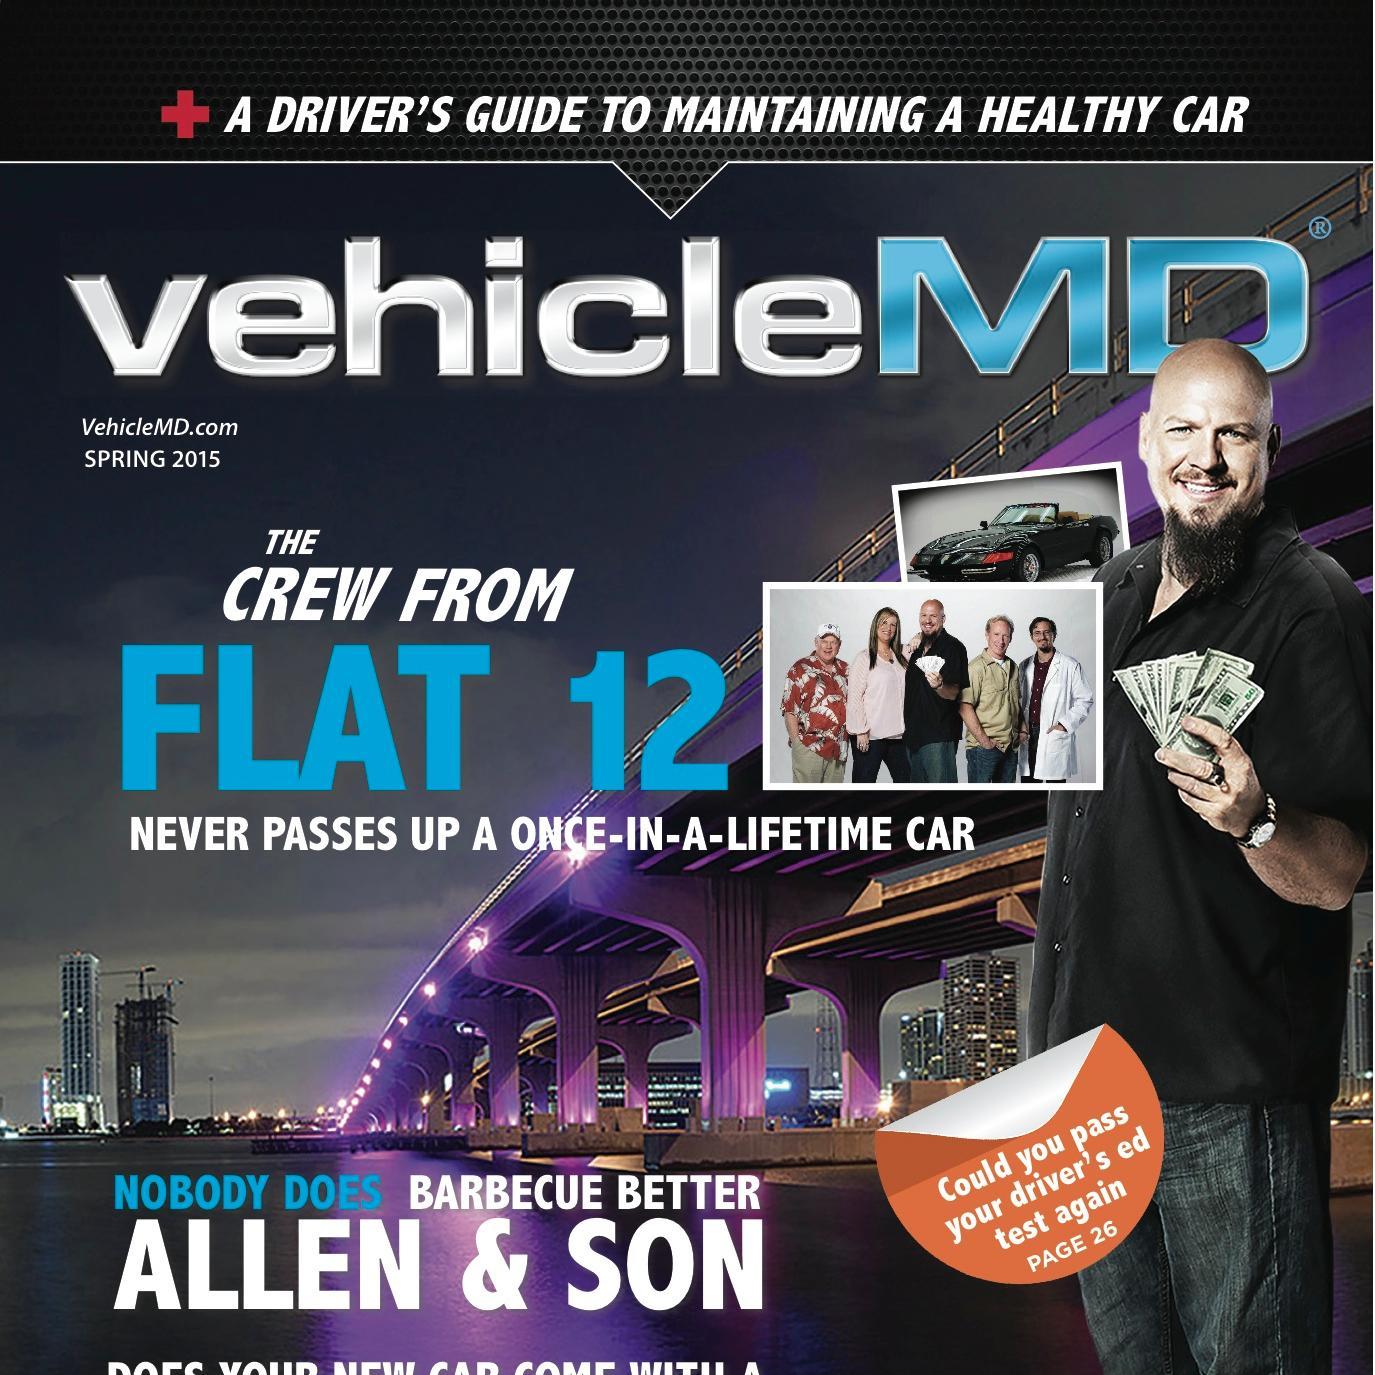 Educational magazine for all drivers and car owners. We are a driver's guide to maintaining a healthy car.